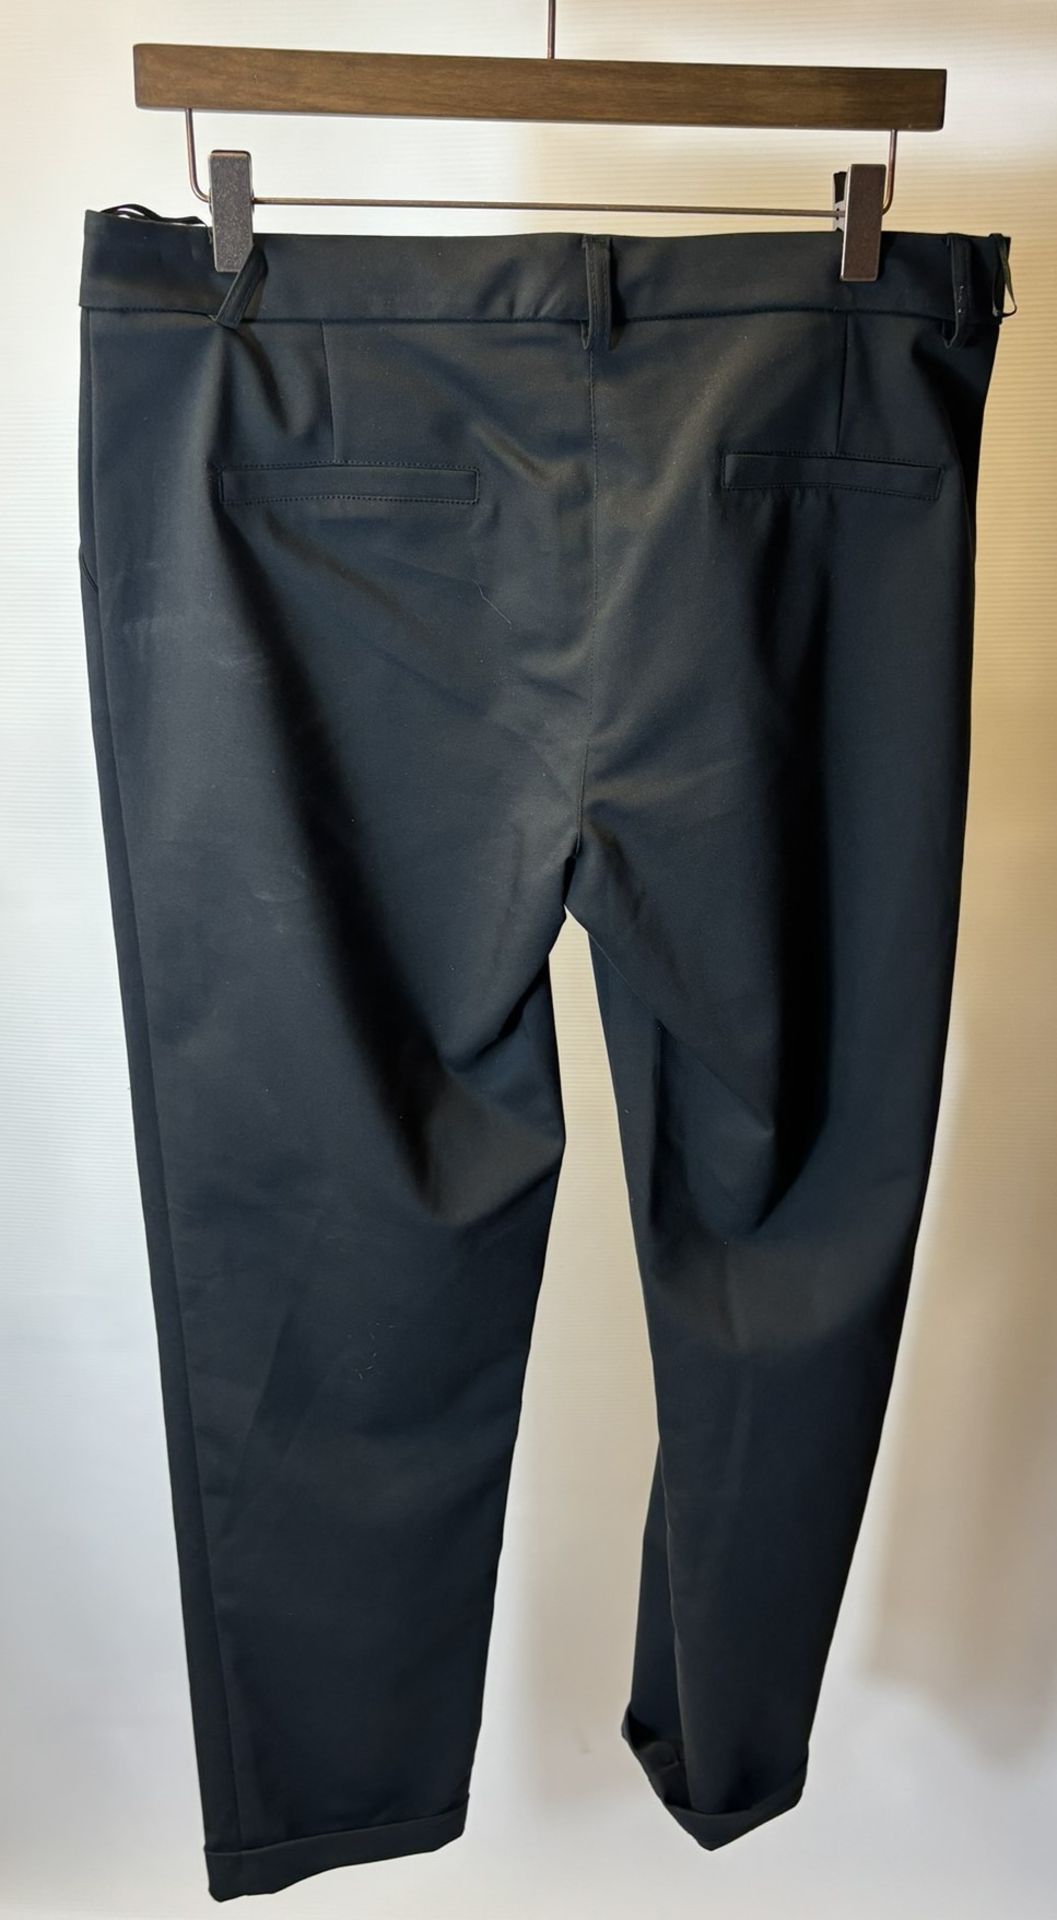 12 x Various Pairs Of Women's Trousers/Jeans As Seen In Photos - Bild 2 aus 36